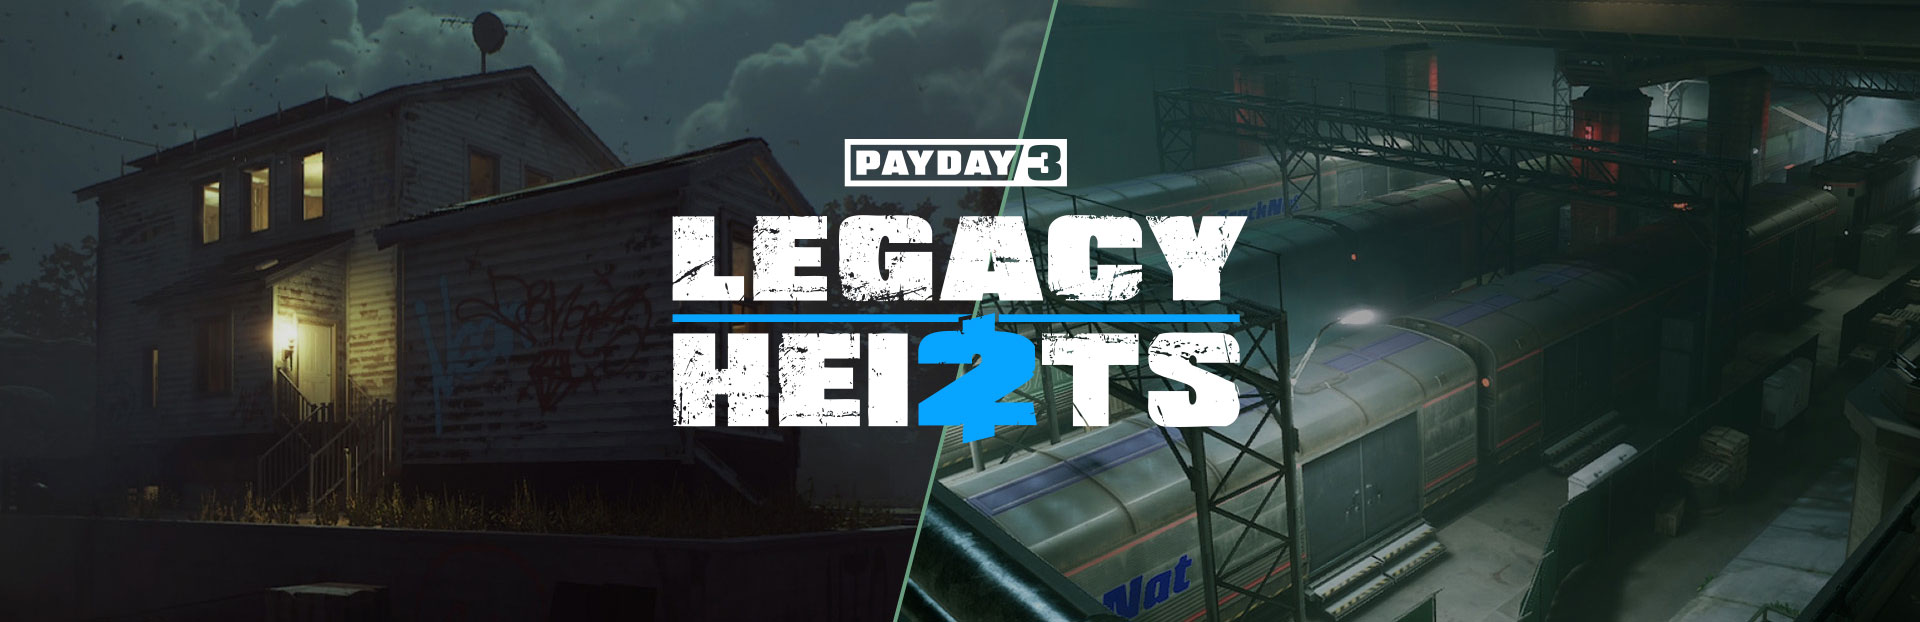 PAYDAY 3: Legacy Heists